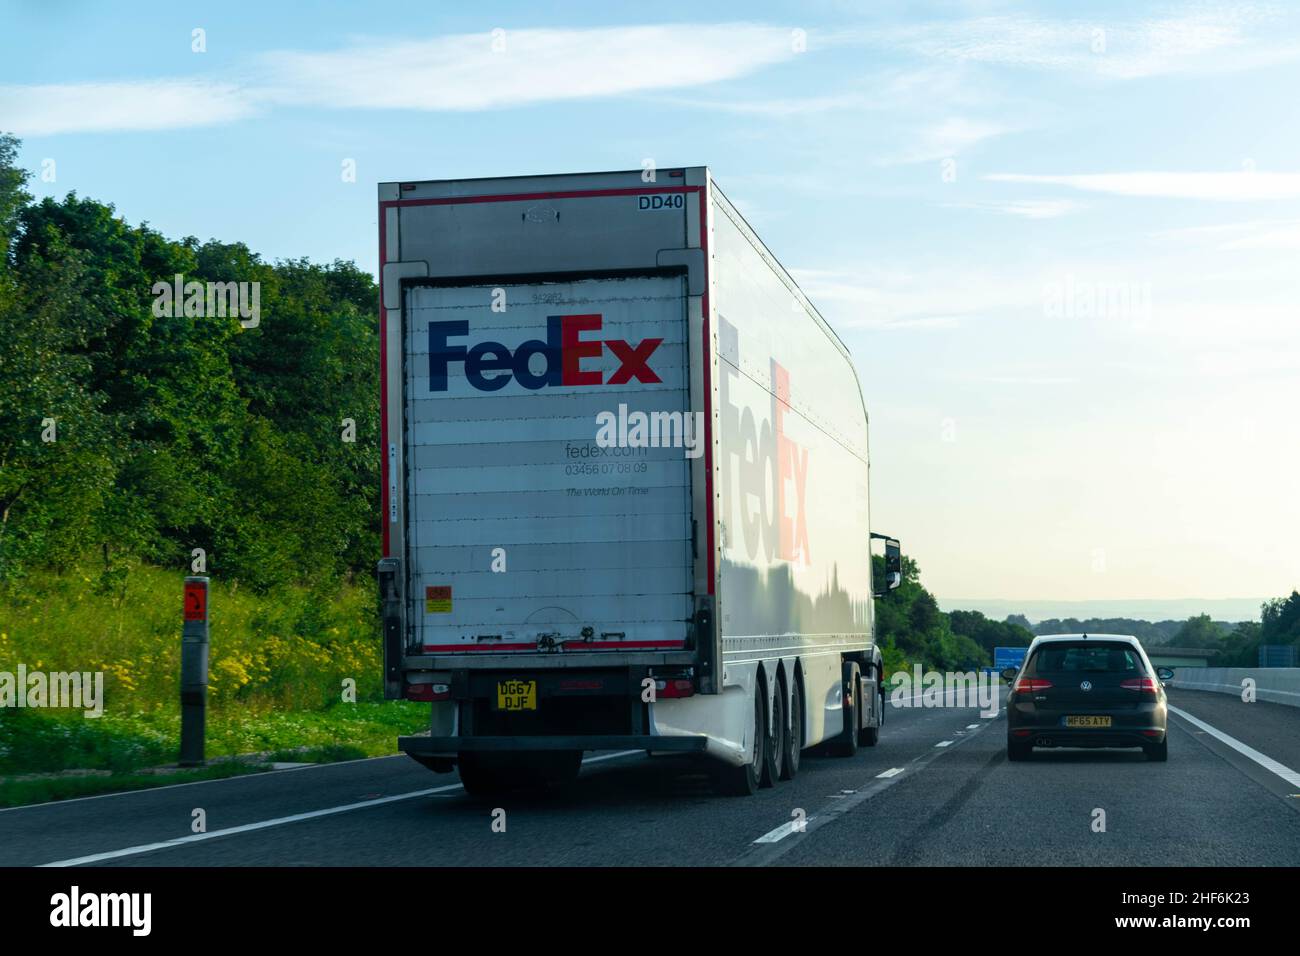 Durham, UK - 23rd August 2019: Fedex, Federal Express,lorry driving down a British motorway. American multinational courier delivery services. Deliver Stock Photo